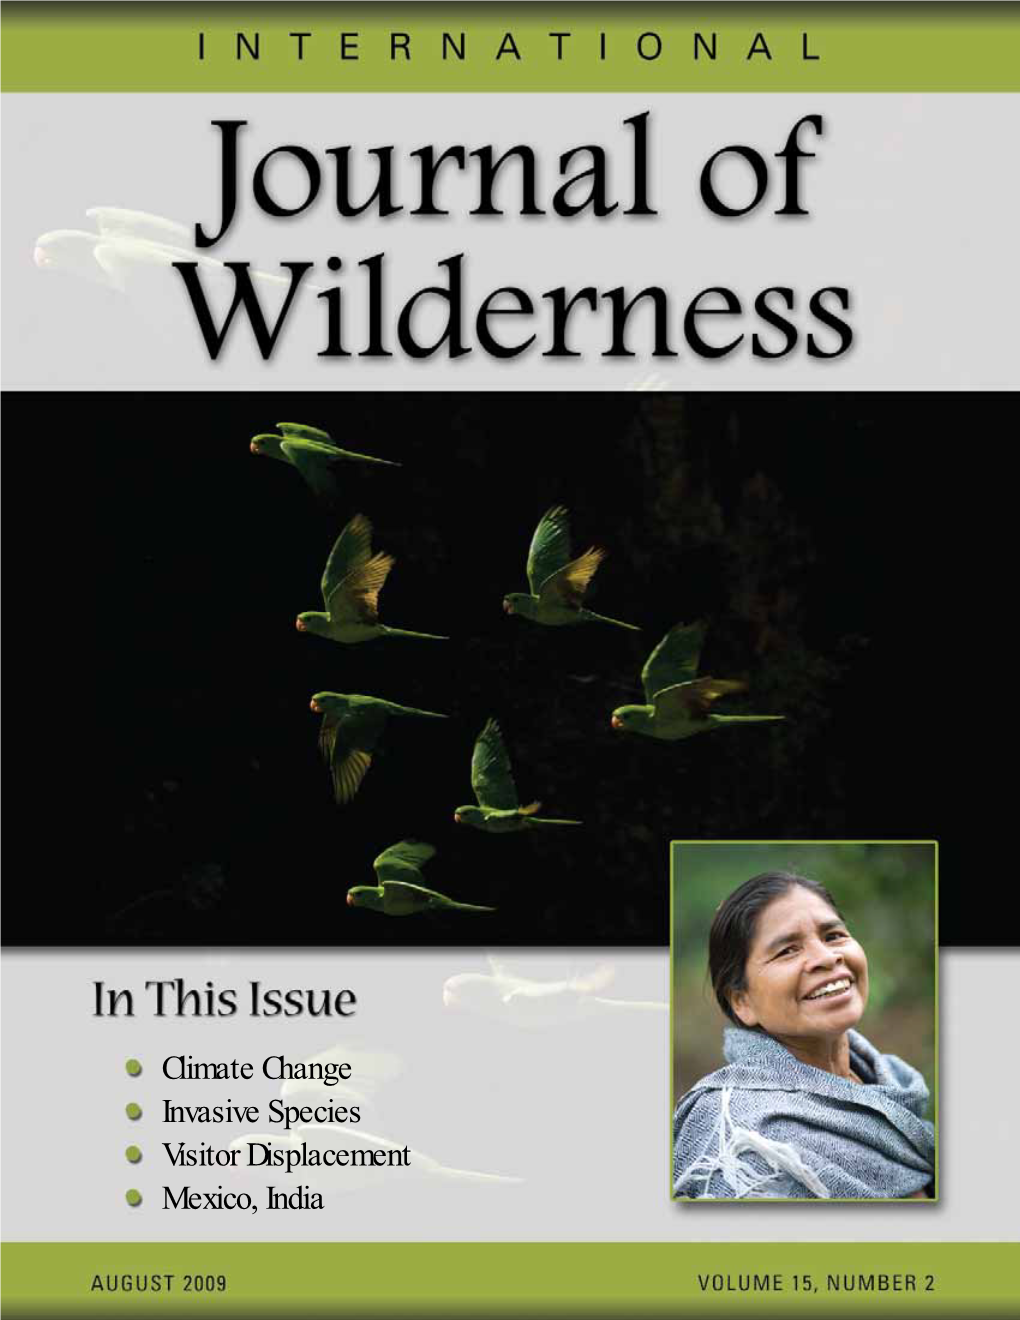 Climate Change Invasive Species Visitor Displacement Mexico, India INTERNATIONAL Journal of Wilderness